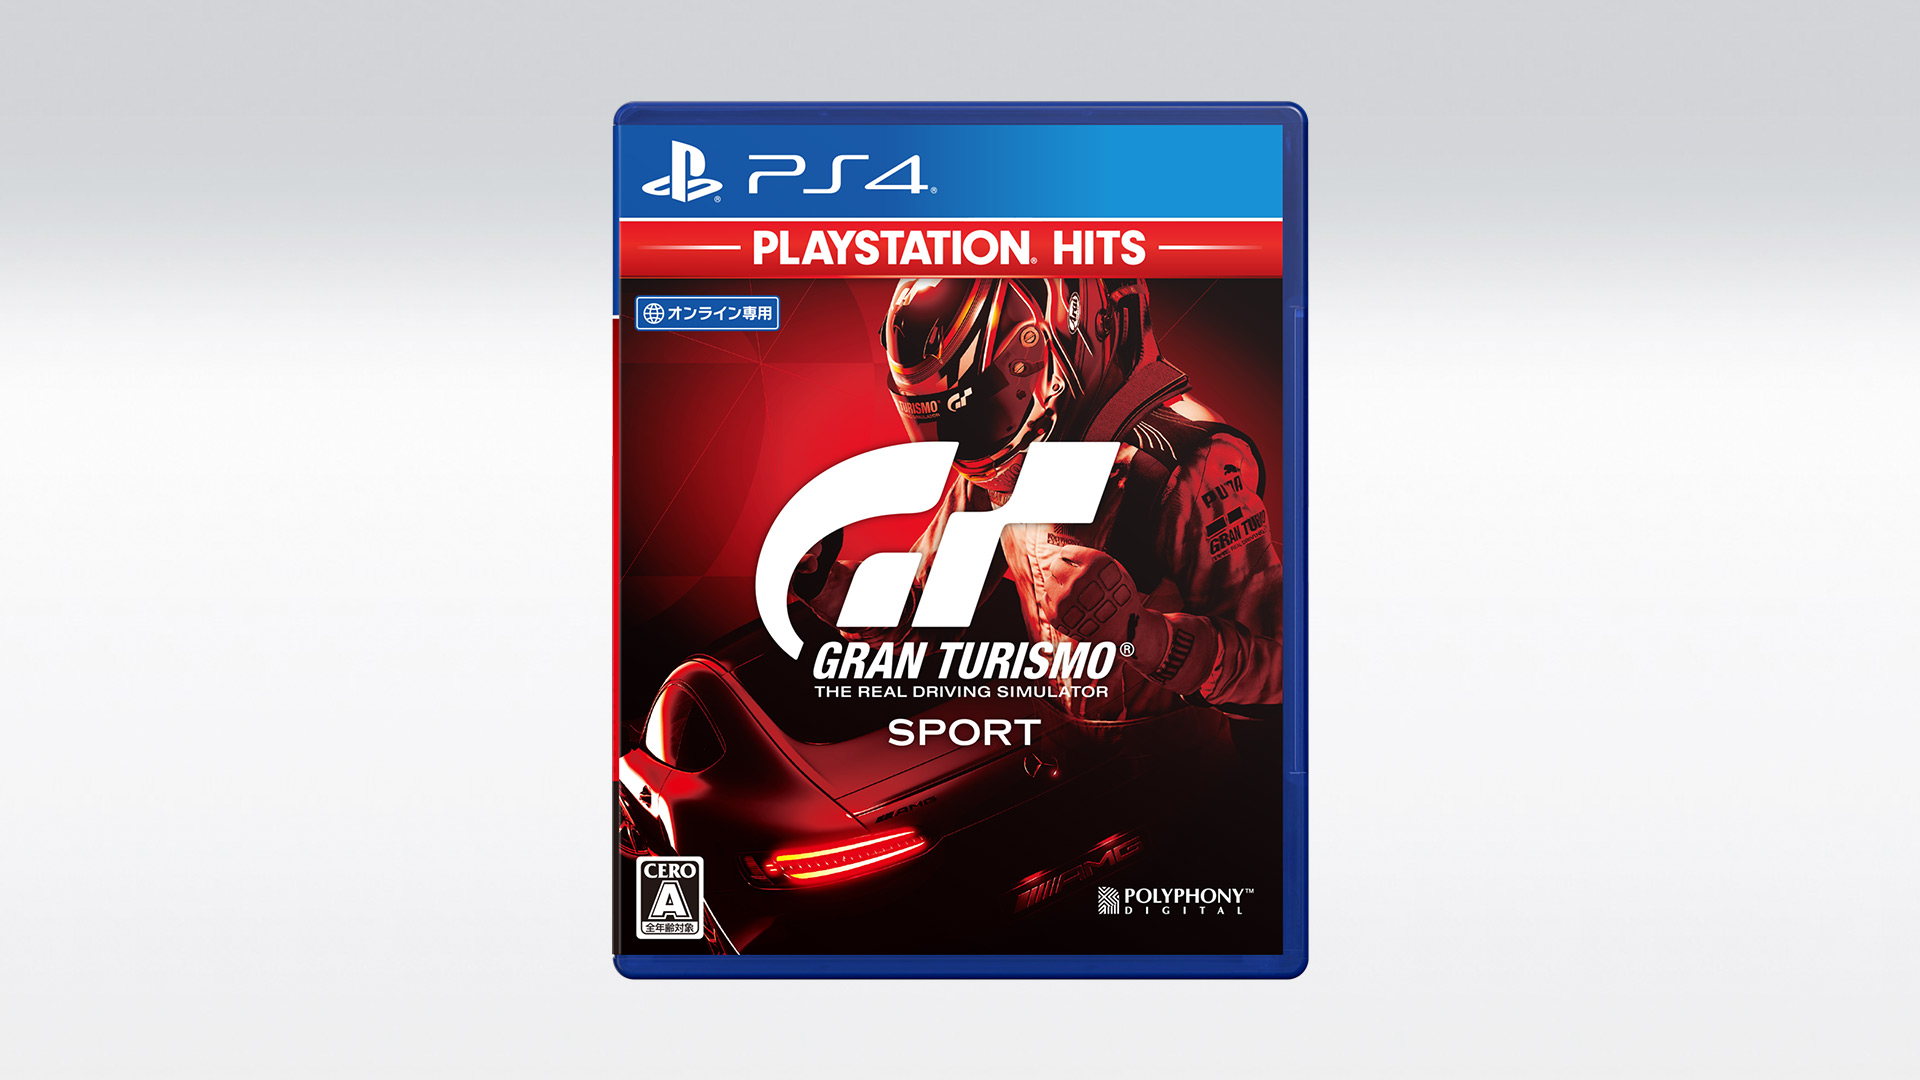 newest gran turismo for ps4